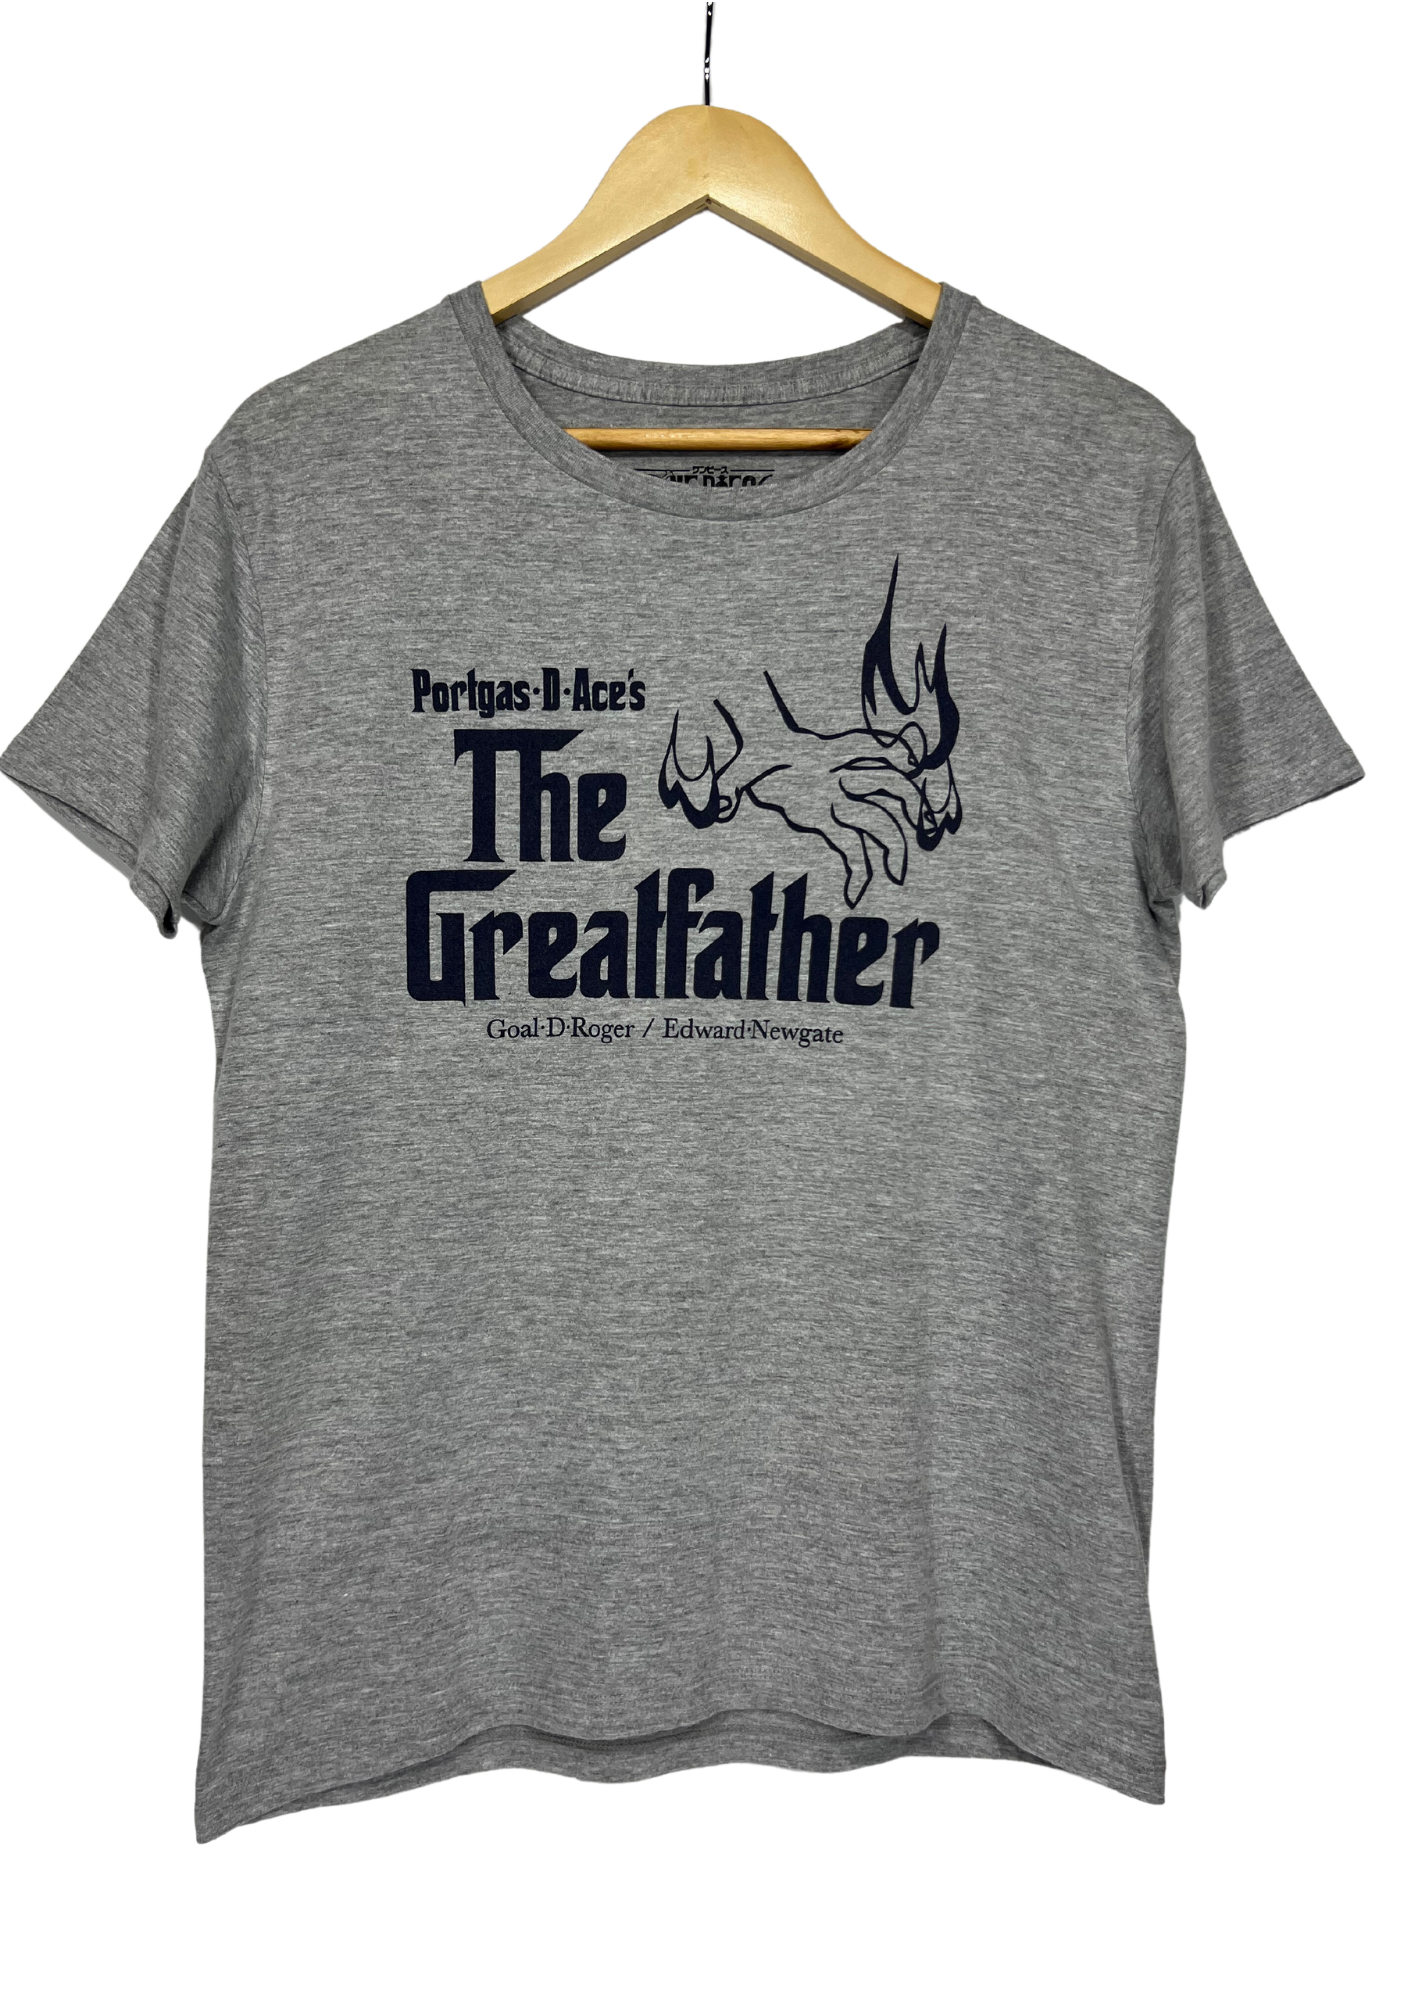 One Piece x Union Station The Greatfather T-shirt